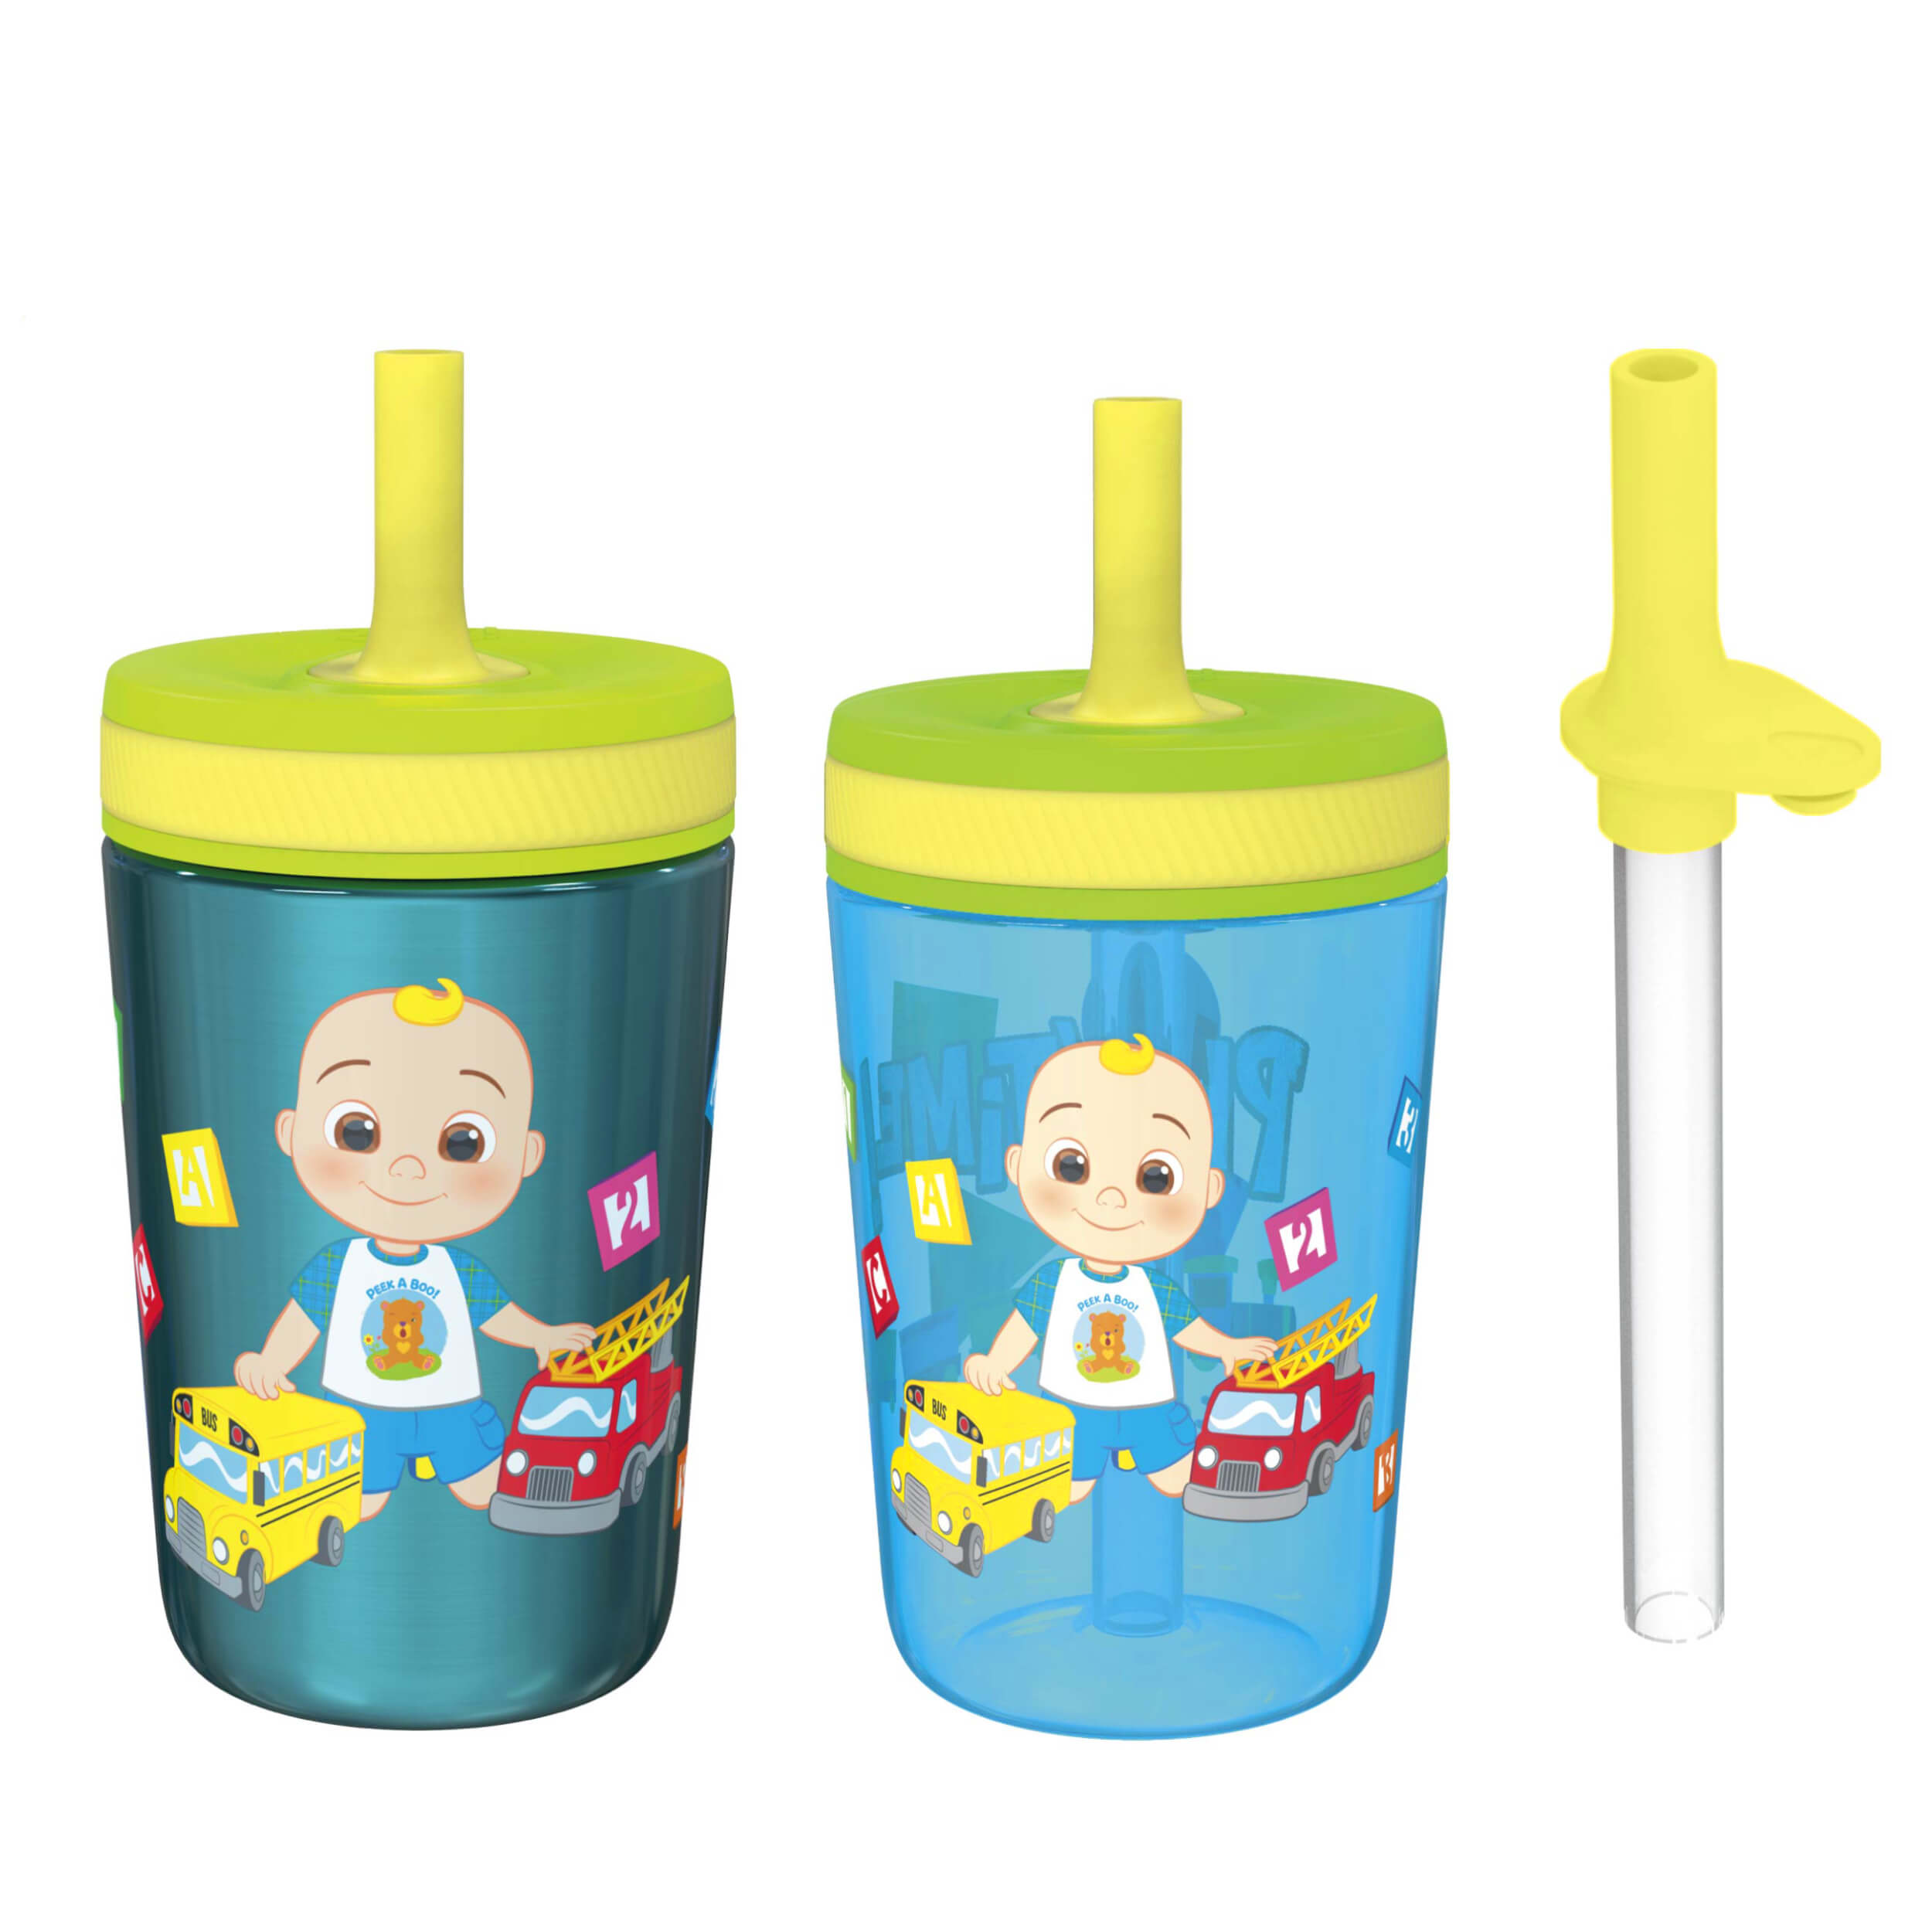  Zak Designs Kelso 15 oz Tumbler 2pc Set, (Campout) Non-BPA  Leak-Proof Screw-On Lid with Straw Made of Durable Plastic and Silicone,  Perfect Baby Cup Bundle for Kids : Baby